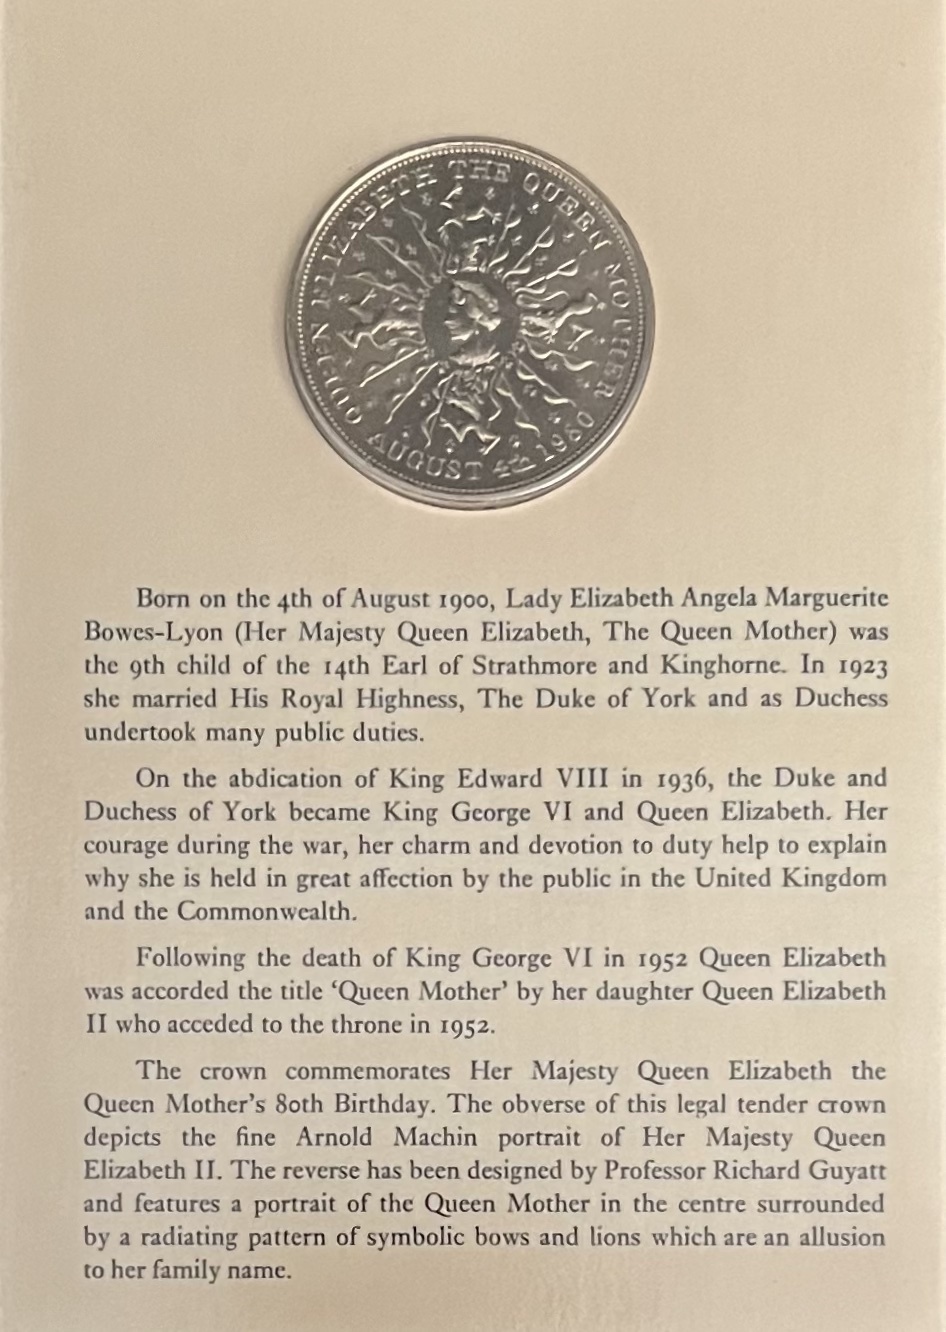 1980 Crown Commemorating the 80th Birthday of the Queen Mother